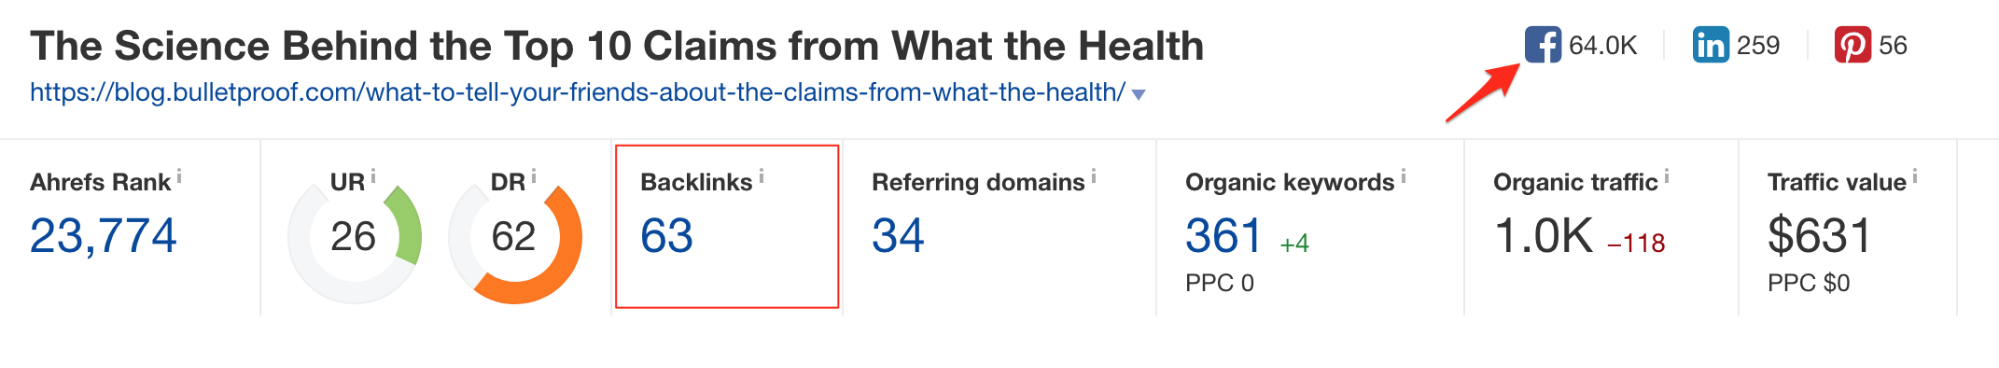 Screenshot showing Ahrefs results for a website